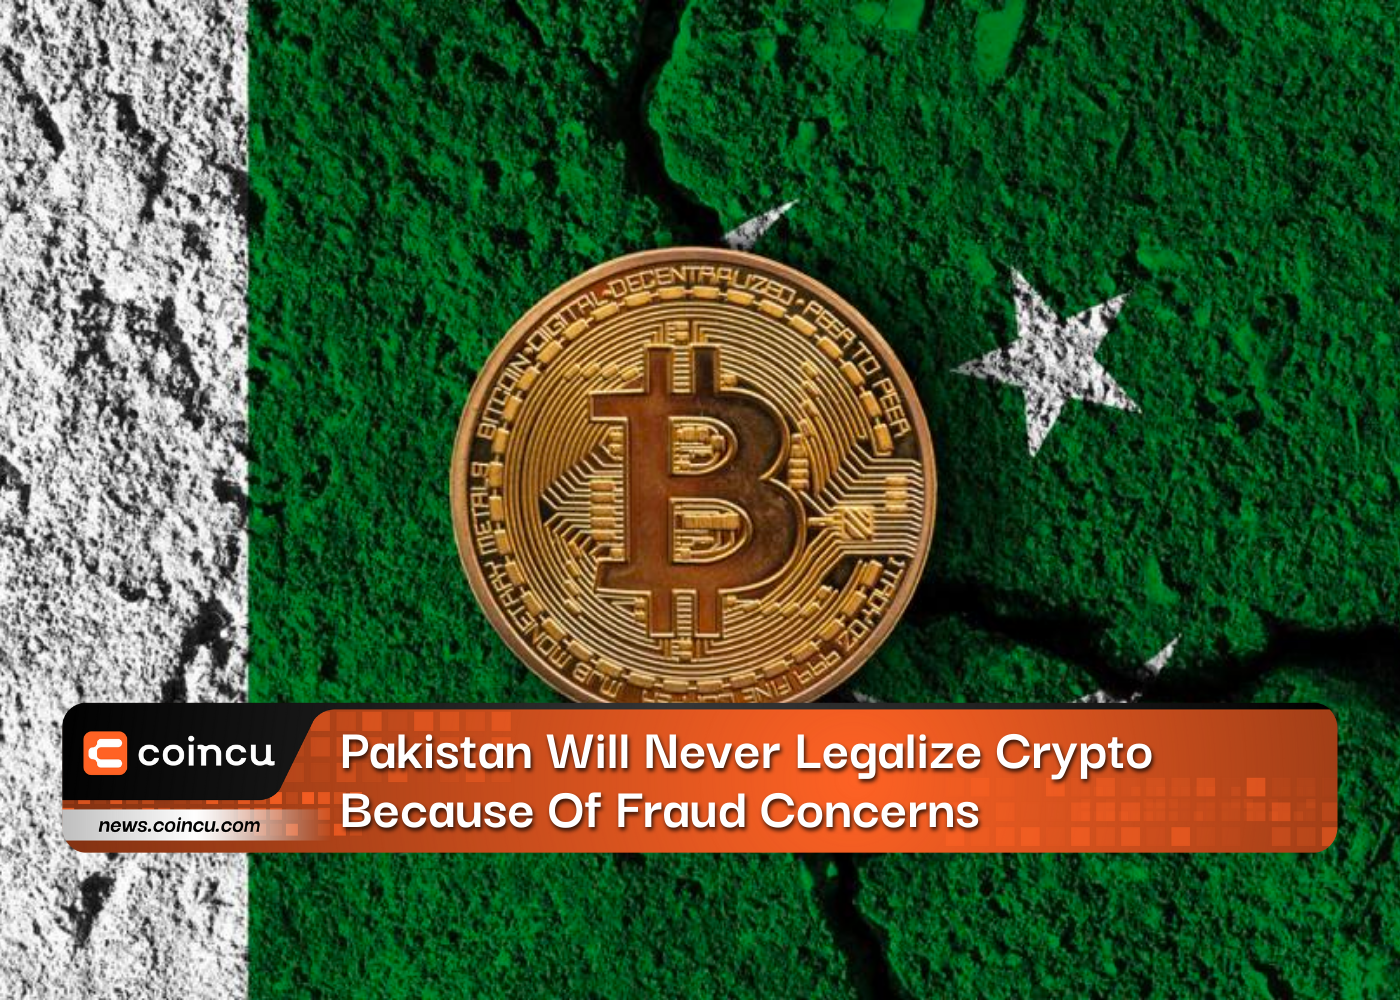 Pakistan Will Never Legalize Crypto Because Of Fraud Concerns